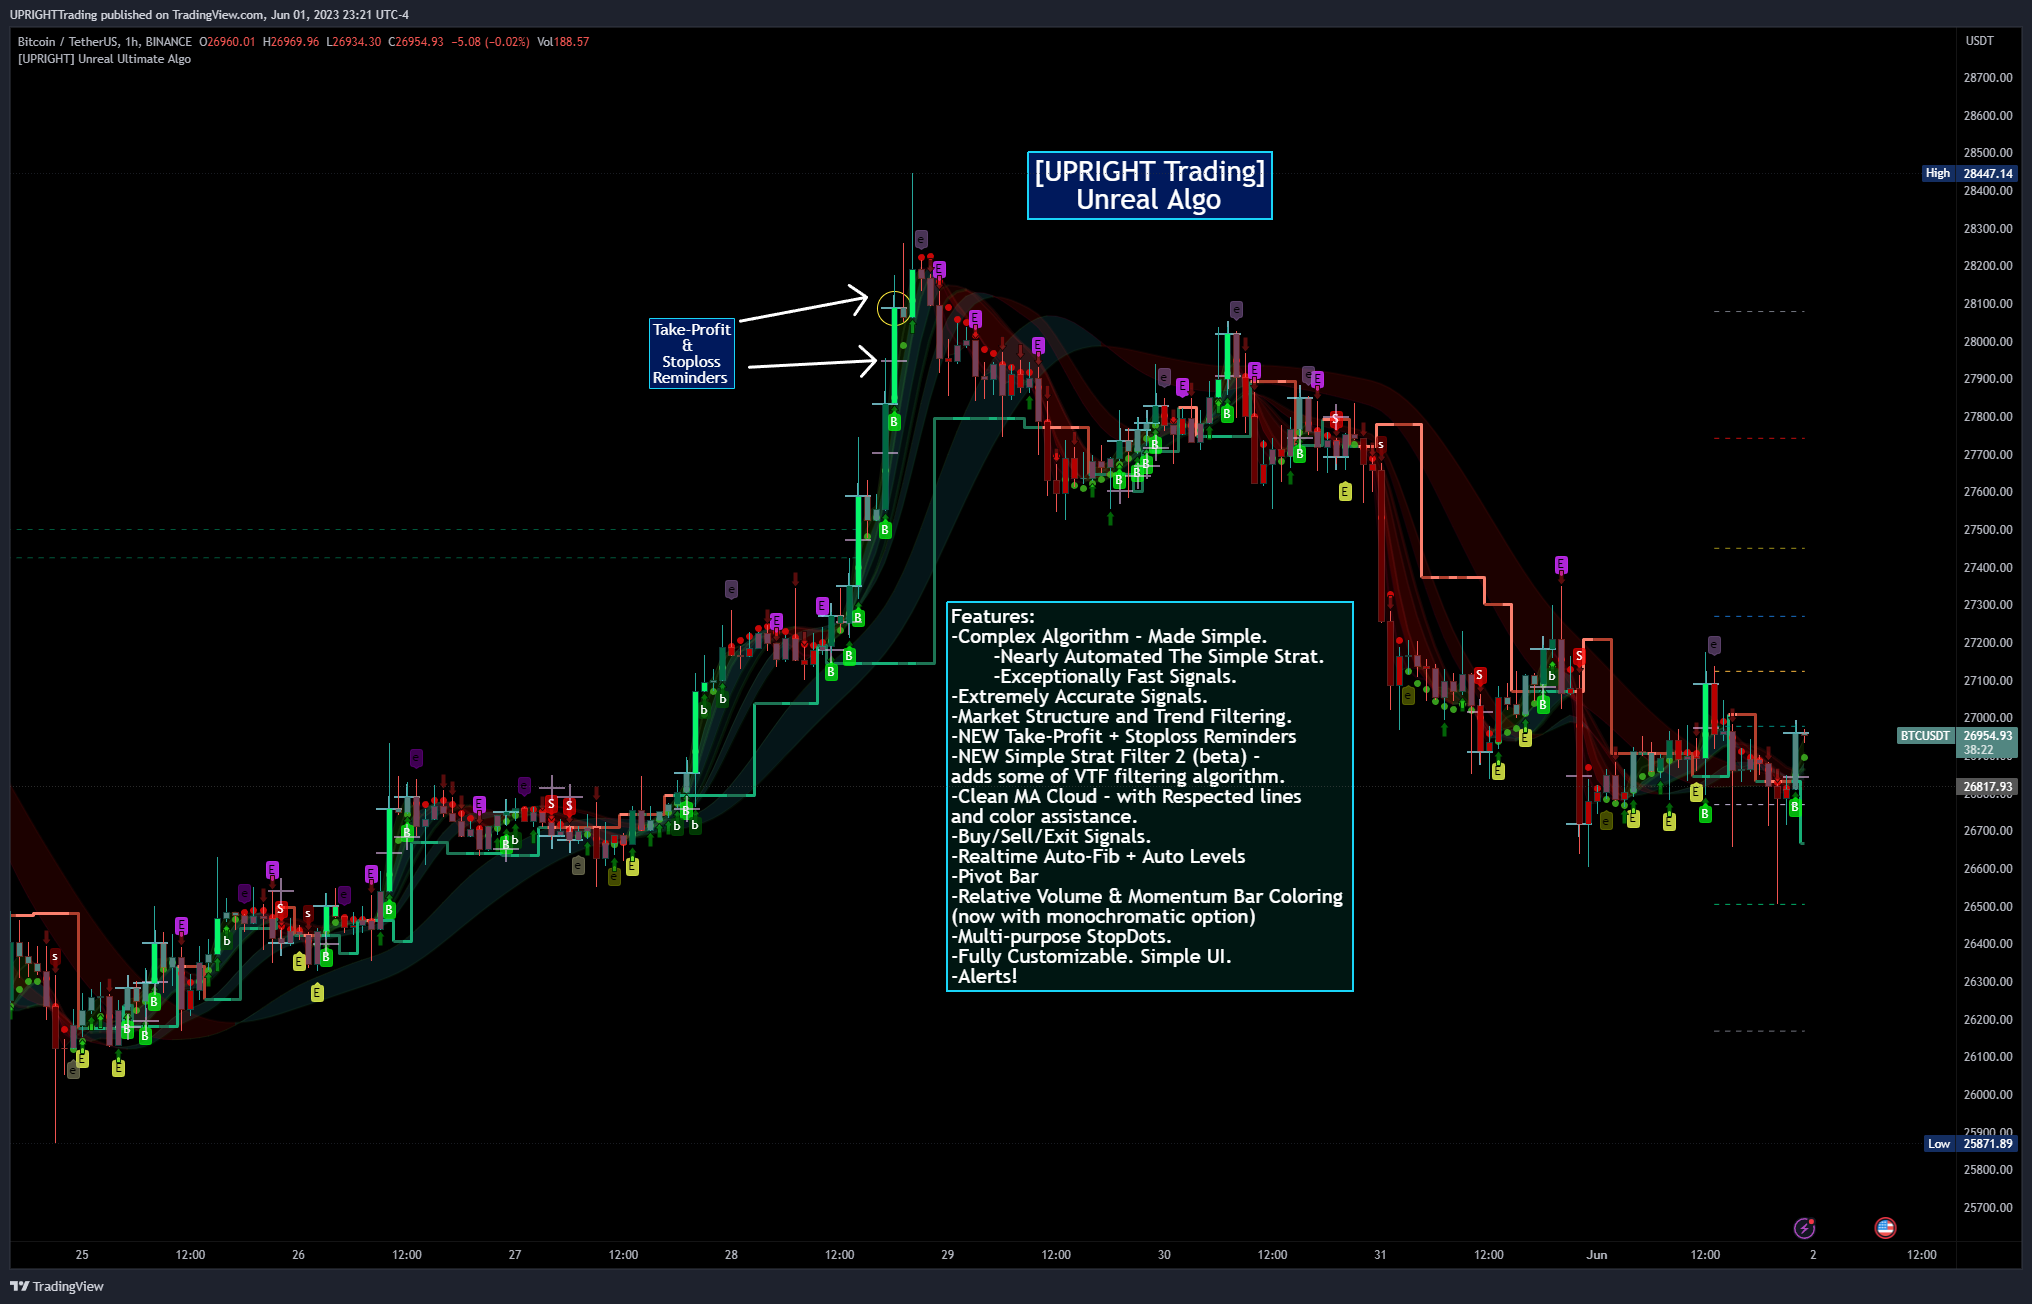 The Best Indicators for Day Trading - UPRIGHT - Unreal Algo